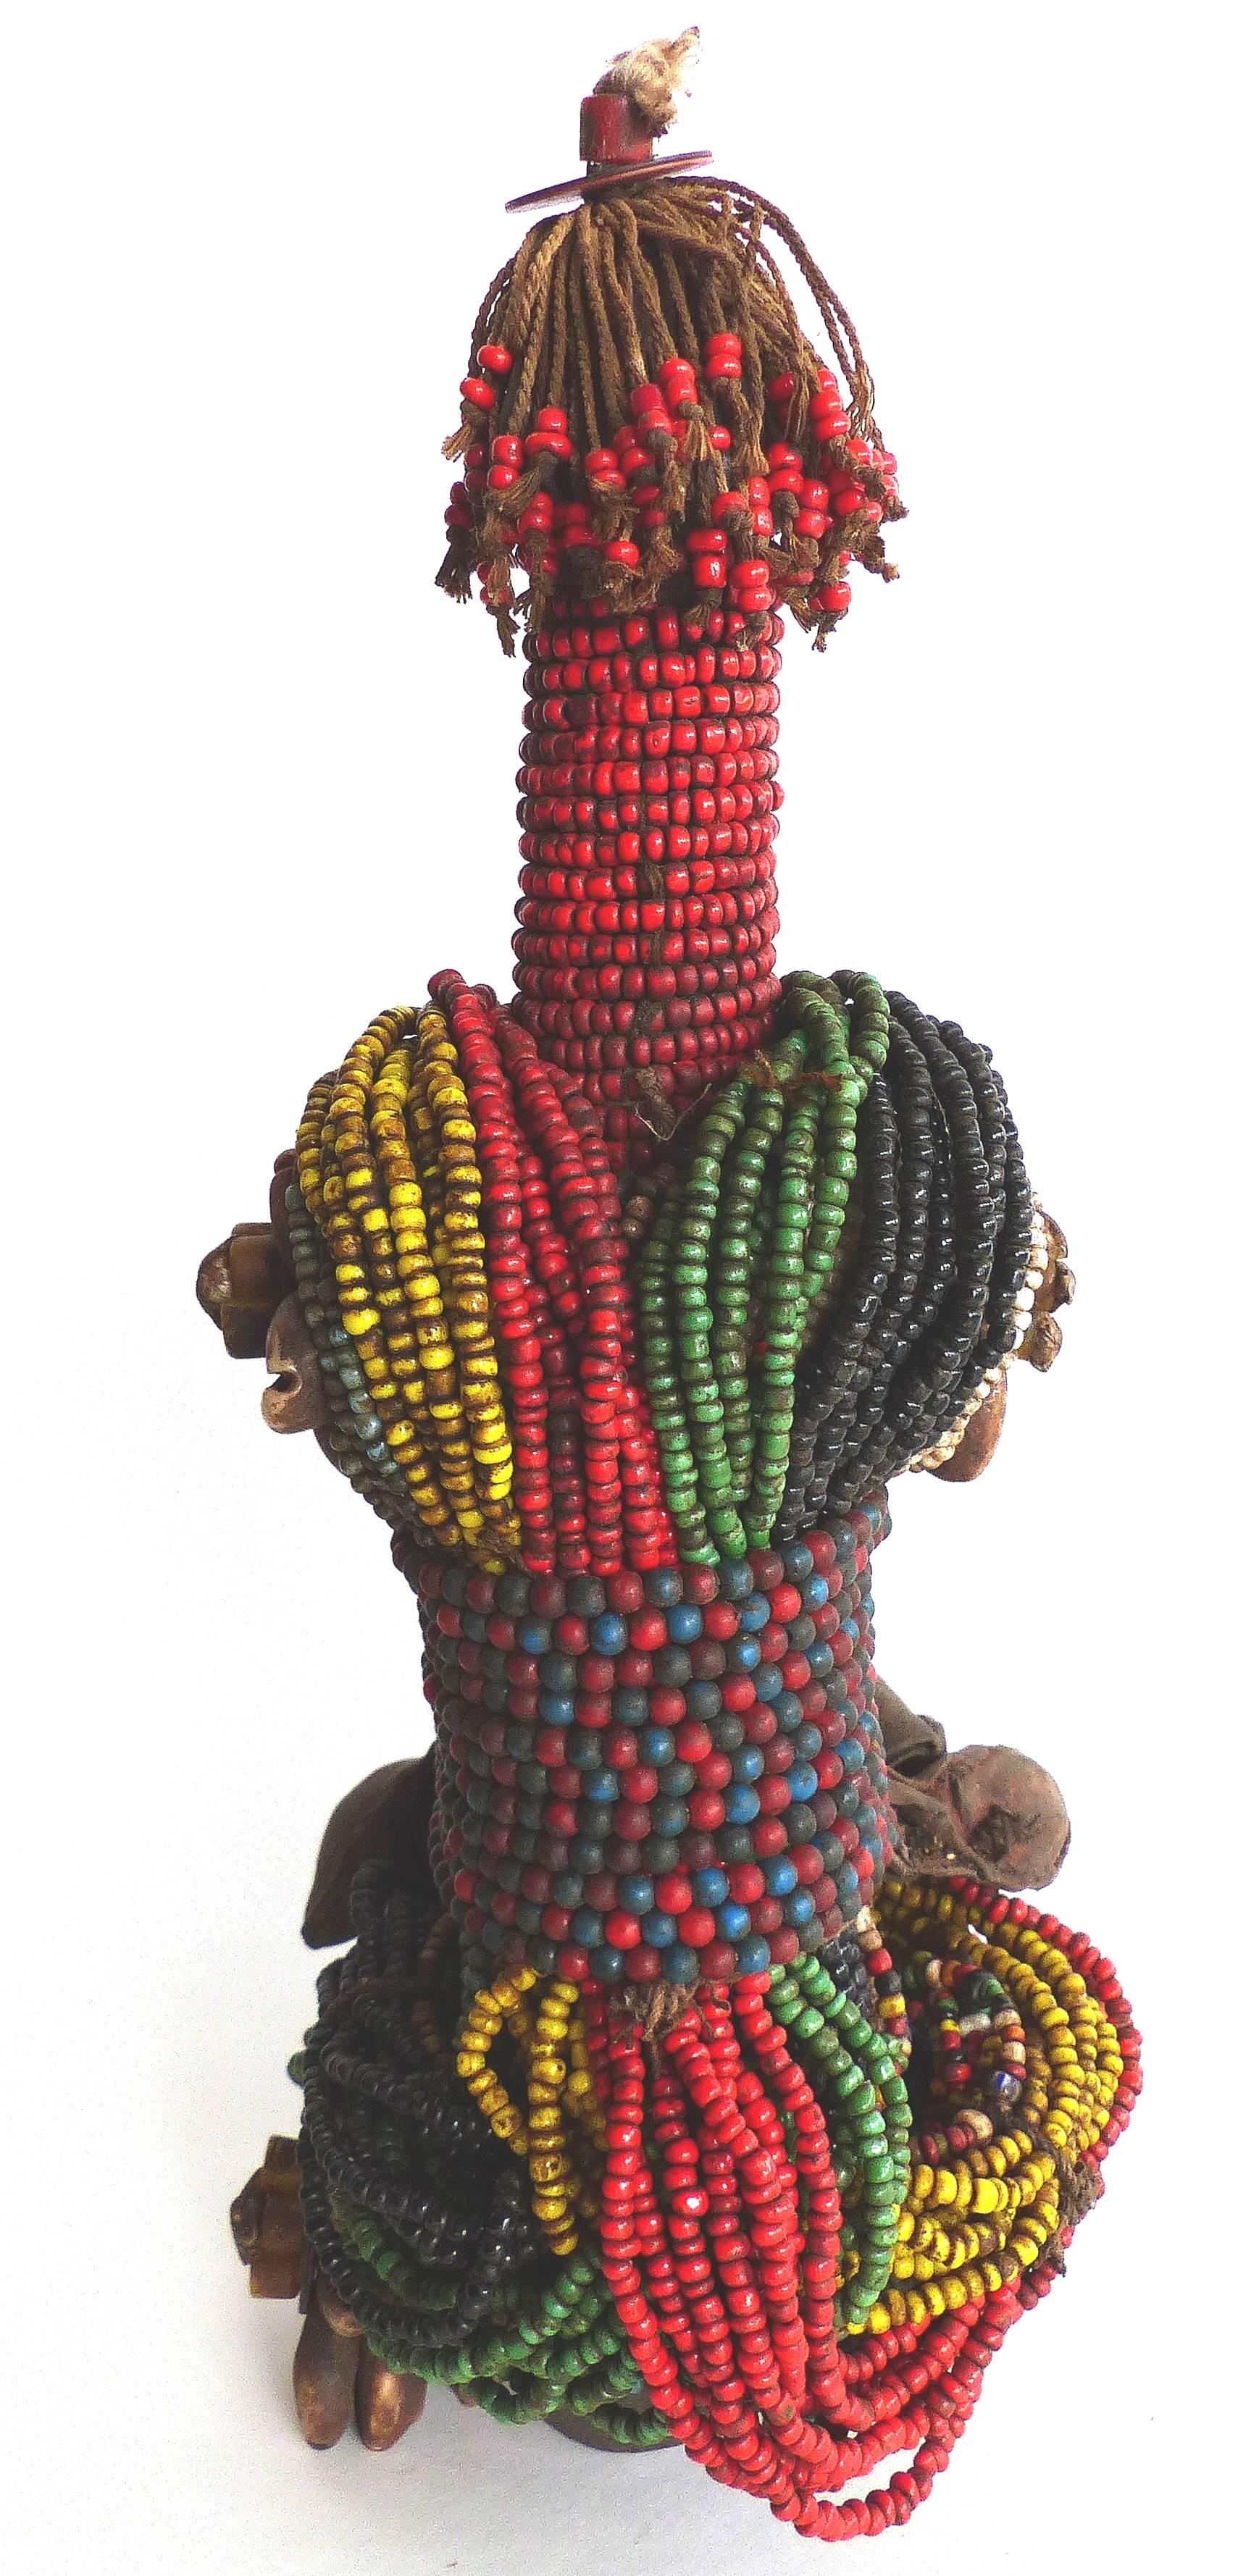 20th Century African Beaded Fali Fertility Doll from Cameroon

Offered is a beaded Mid-20th Century African Fali fertility doll which comes from Cameroon. This doll with it's phallic shape is made of wood which is adorned with beads and leather